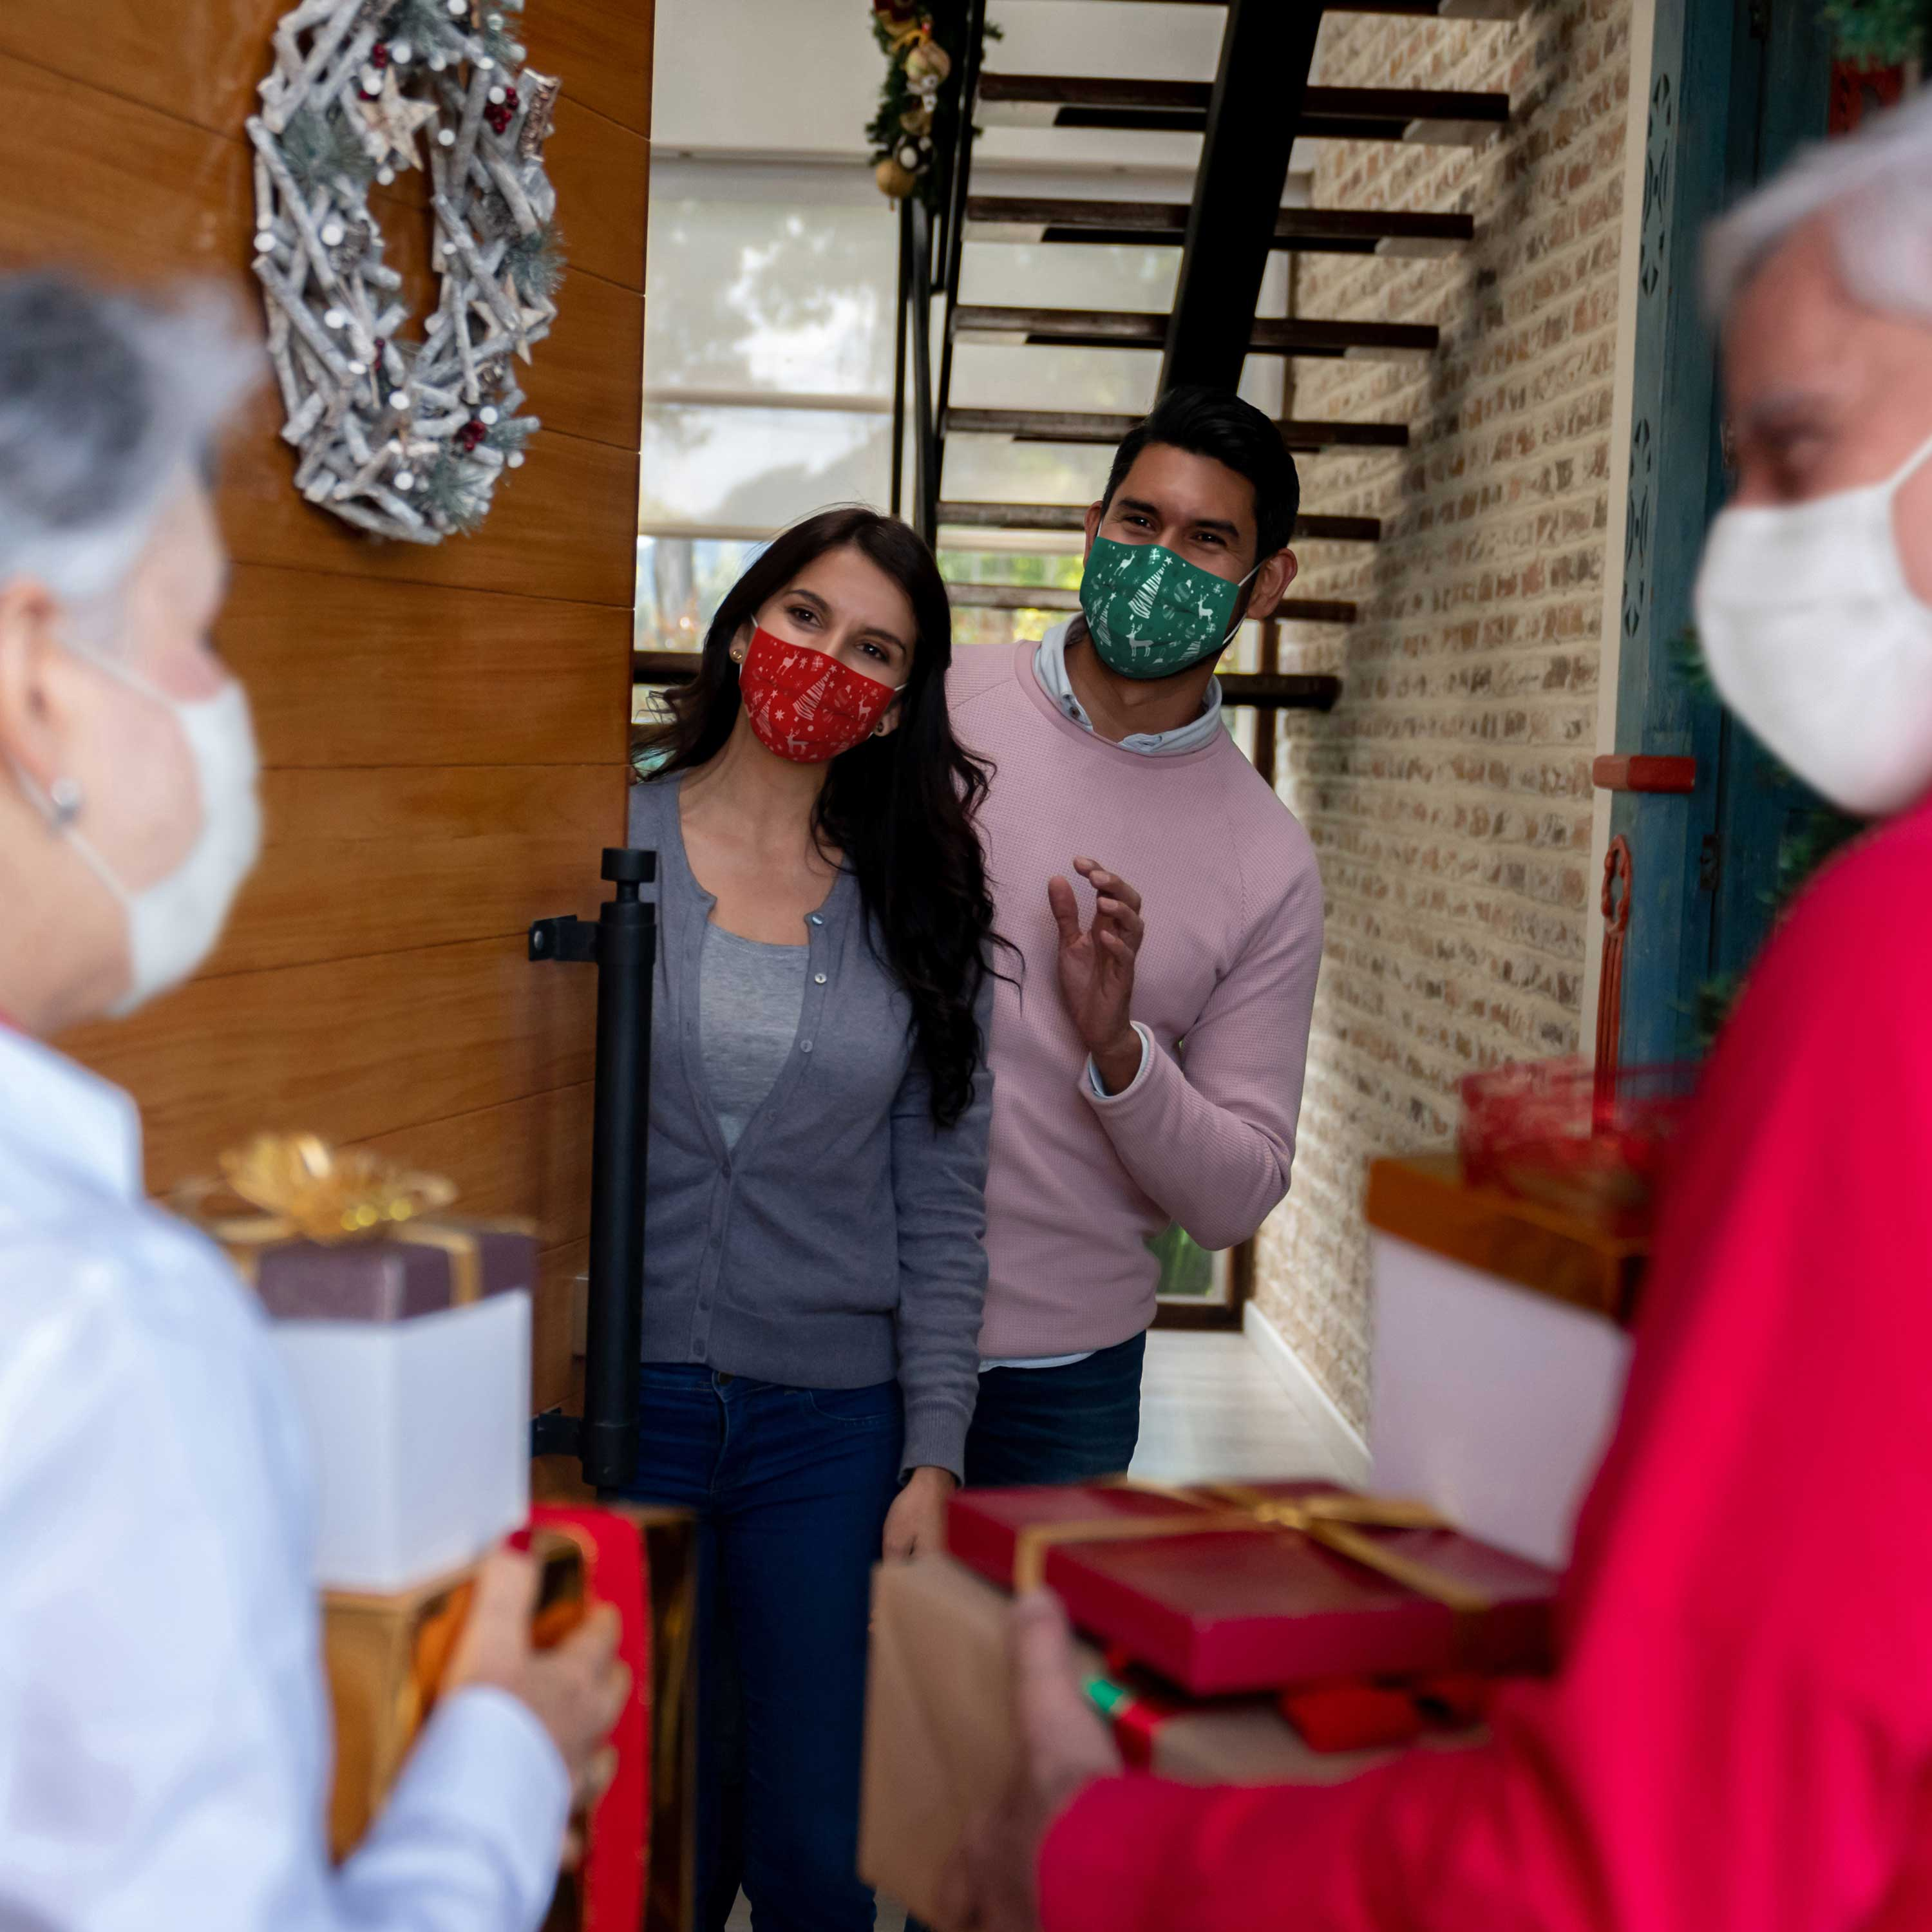 Some last minute tips from an epidemiologist to make your Christmas as COVID-safe as possible